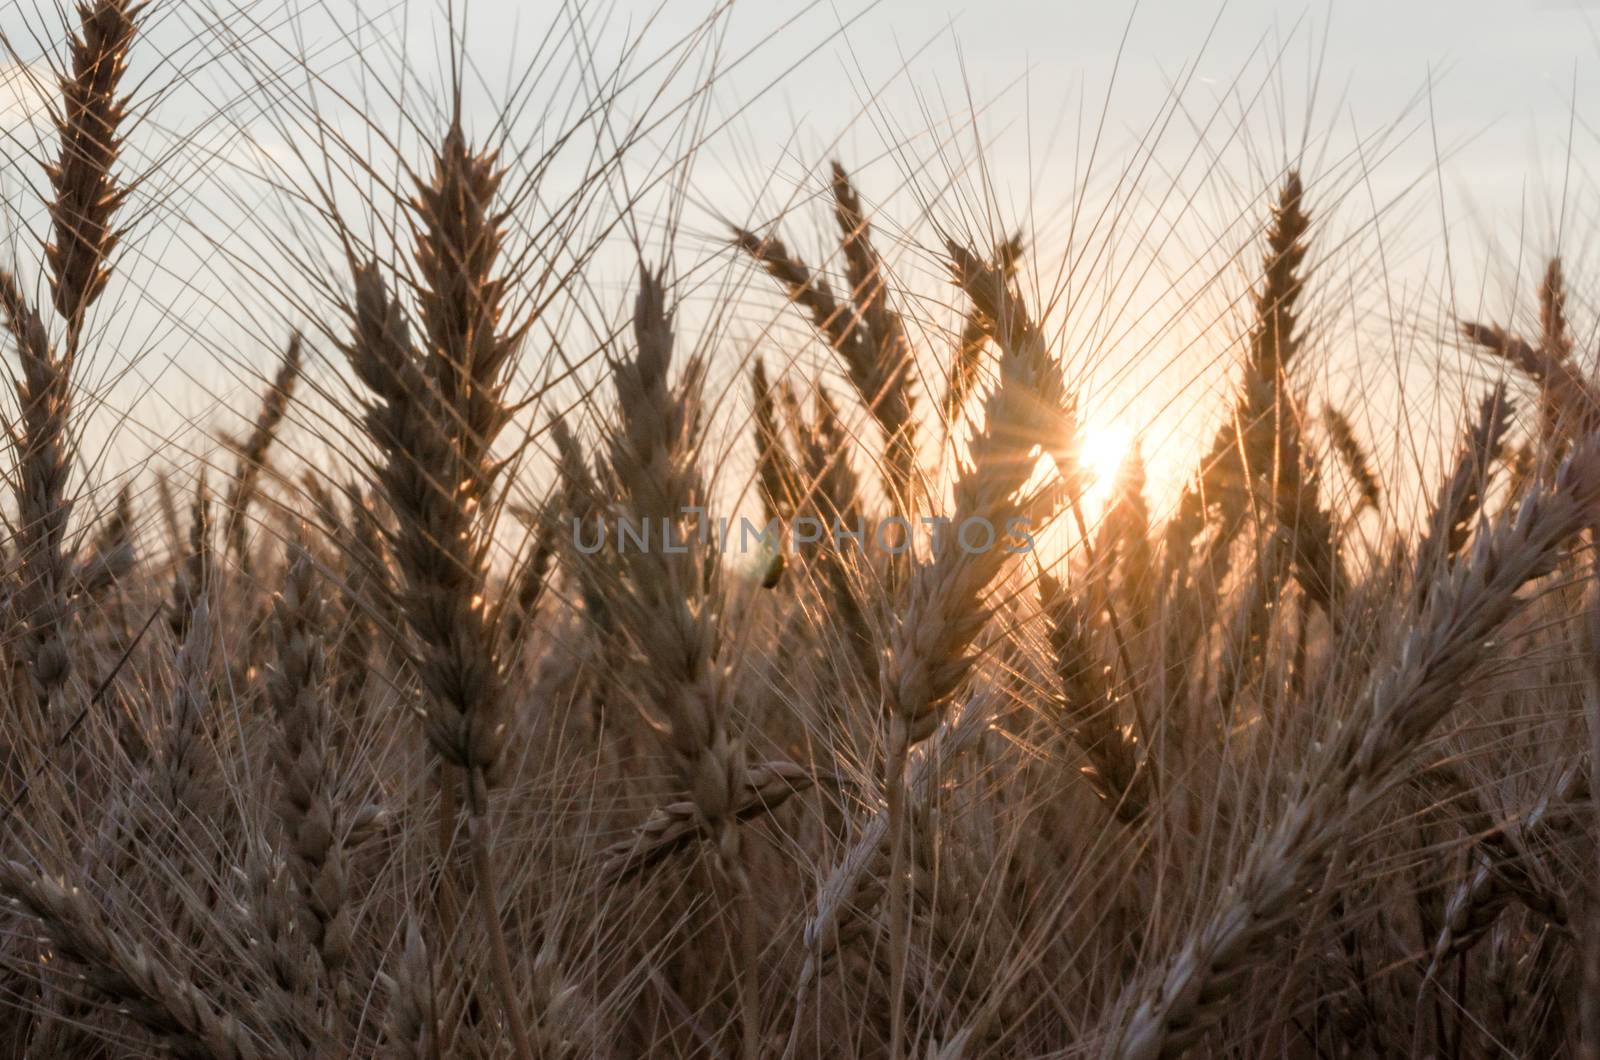 spikelets of wheat at sunset blurry by Gera8th